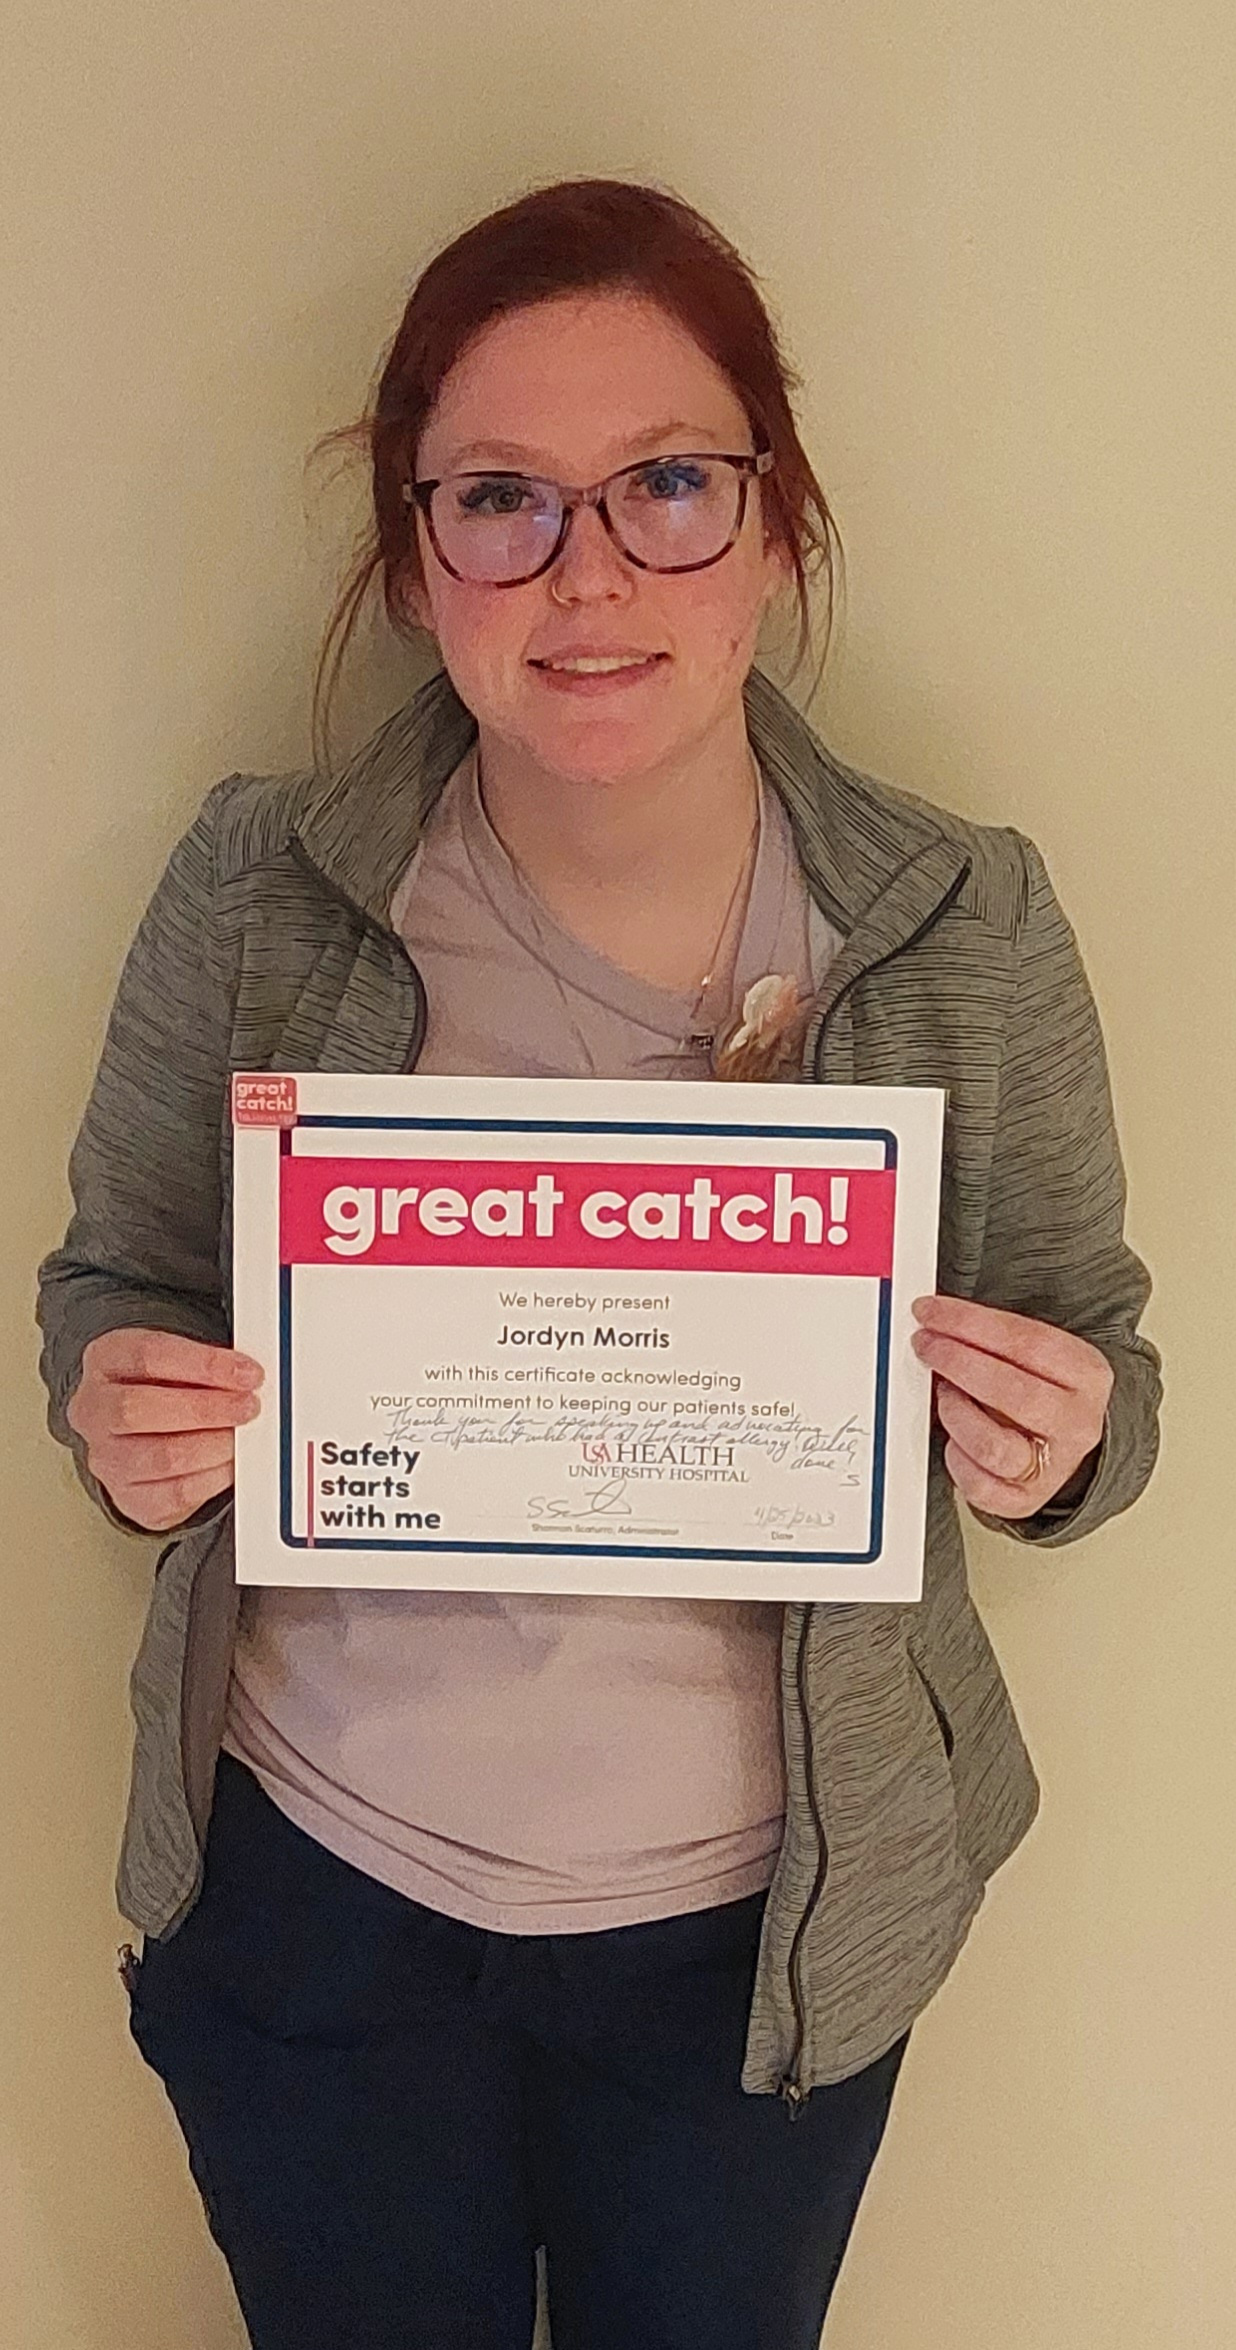 Jordyn Morris, CT technologist, won two Great Catches during the month.